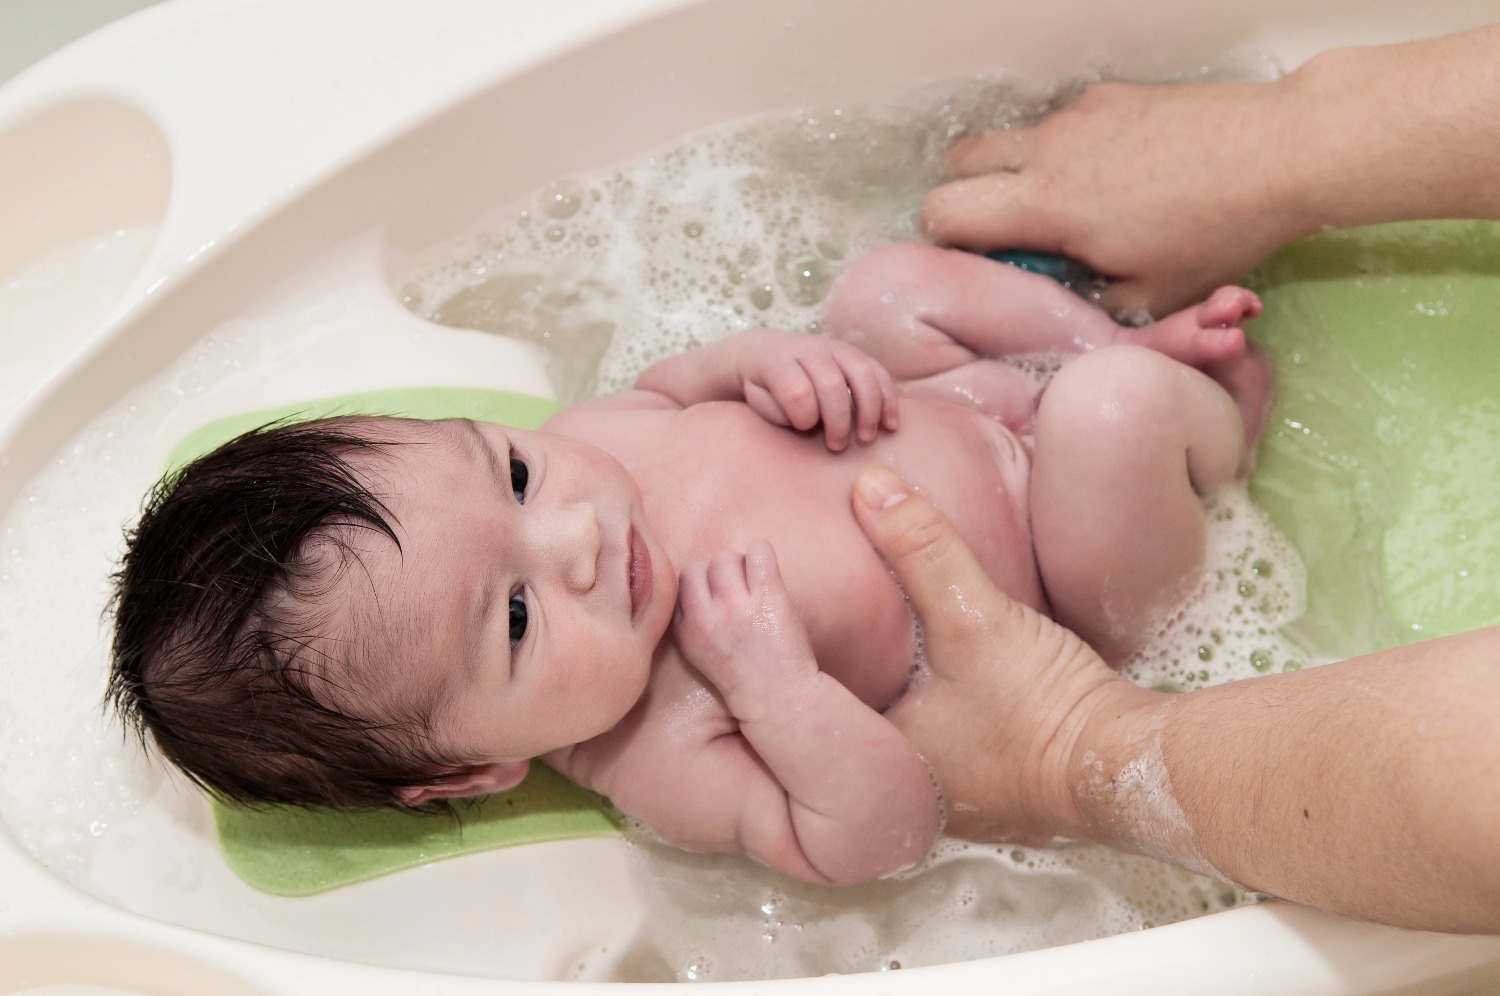 Bath to bundle: All you need to know about keeping your newborn squeaky clean!